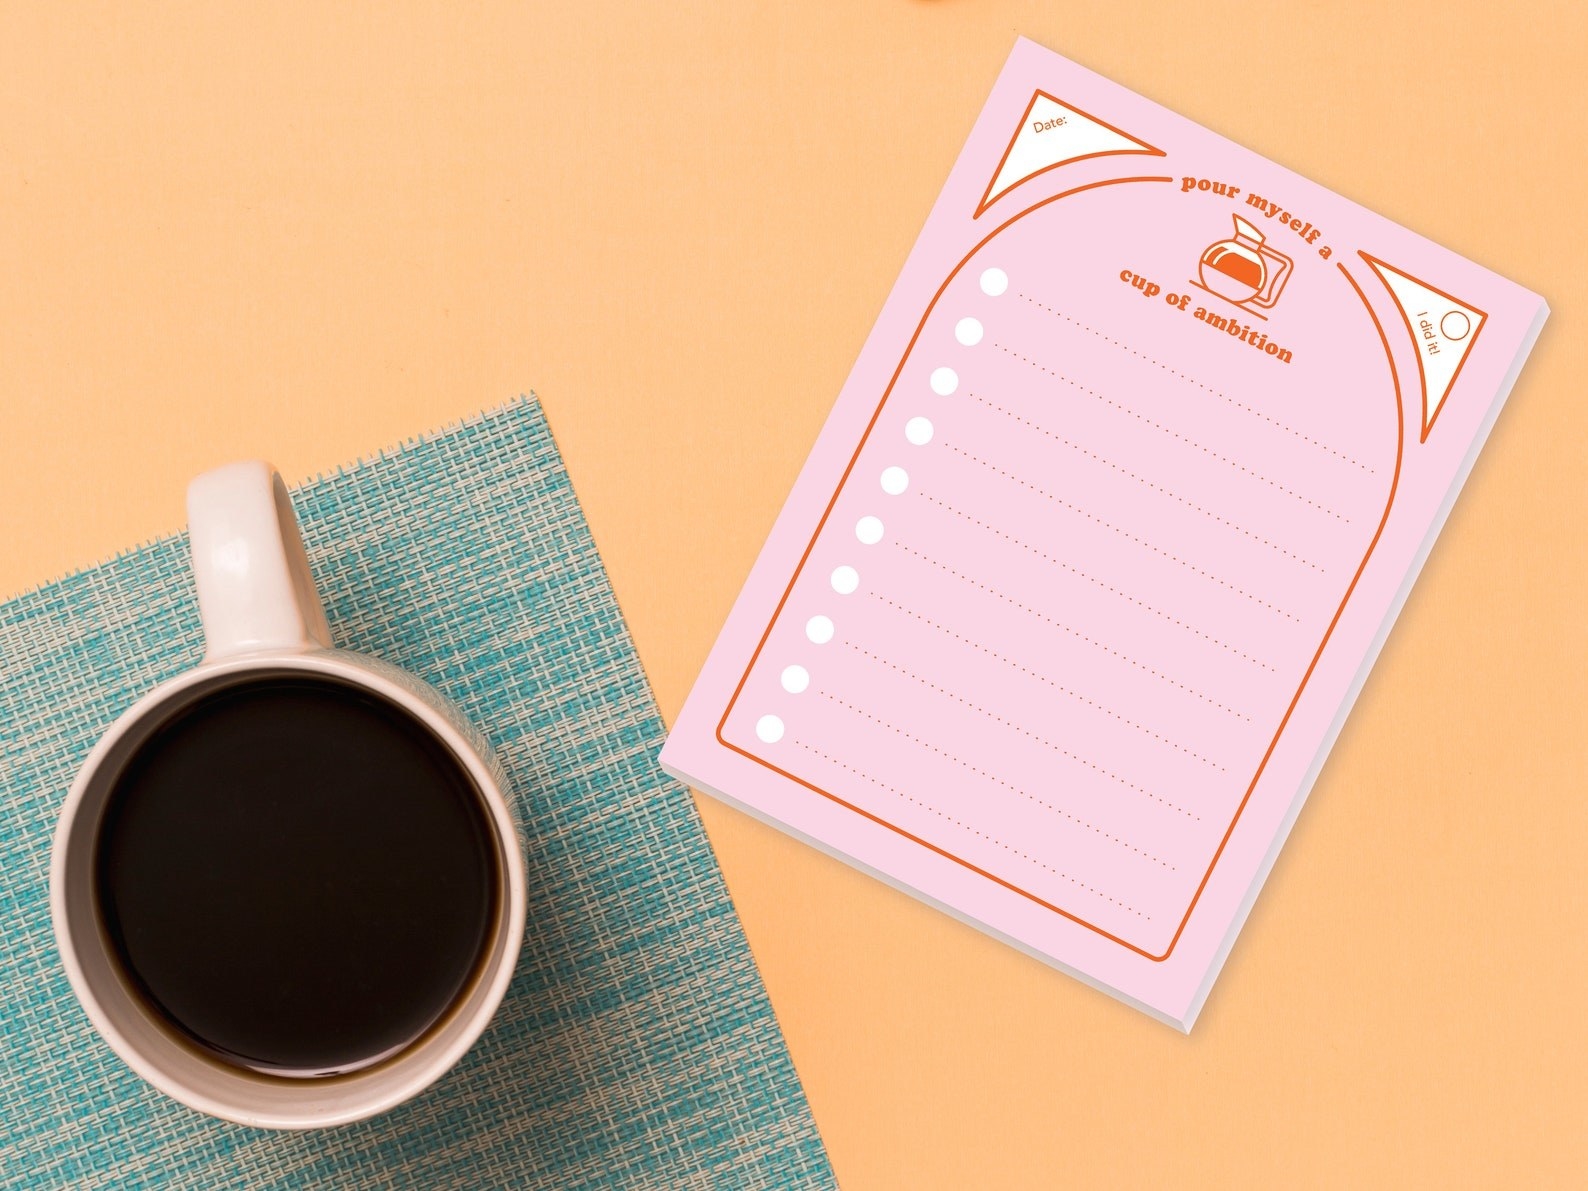 The pink notepad with a coffee pot icon and &quot;pour myself a cup of ambitiion&quot; with date box and room for 10 to-do tasks